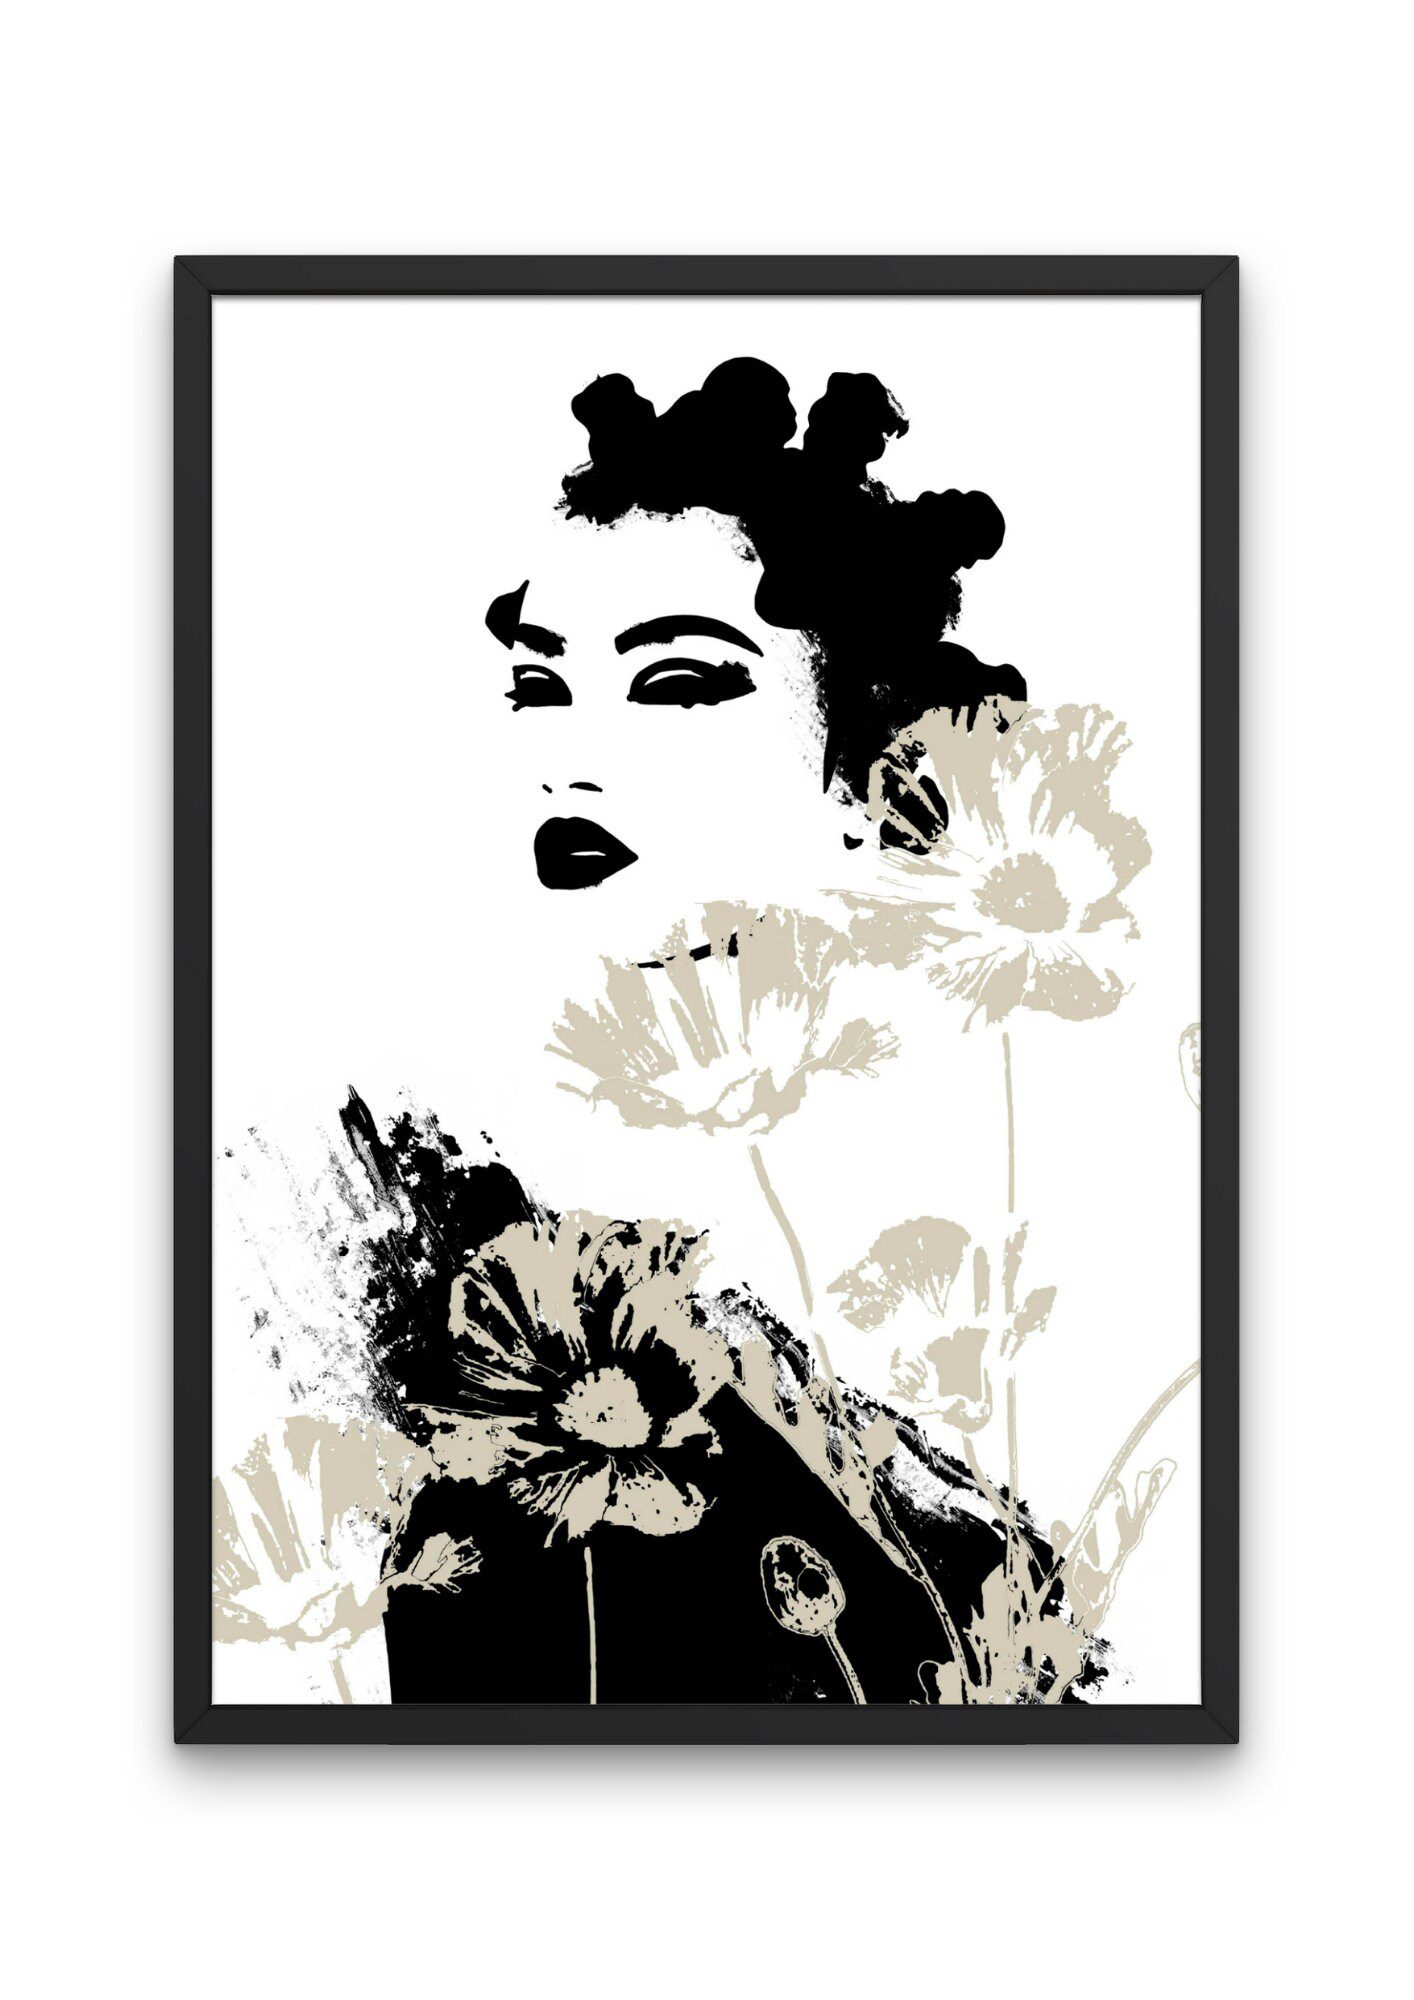 Black-Owned Wall Art & Afrocentric Prints